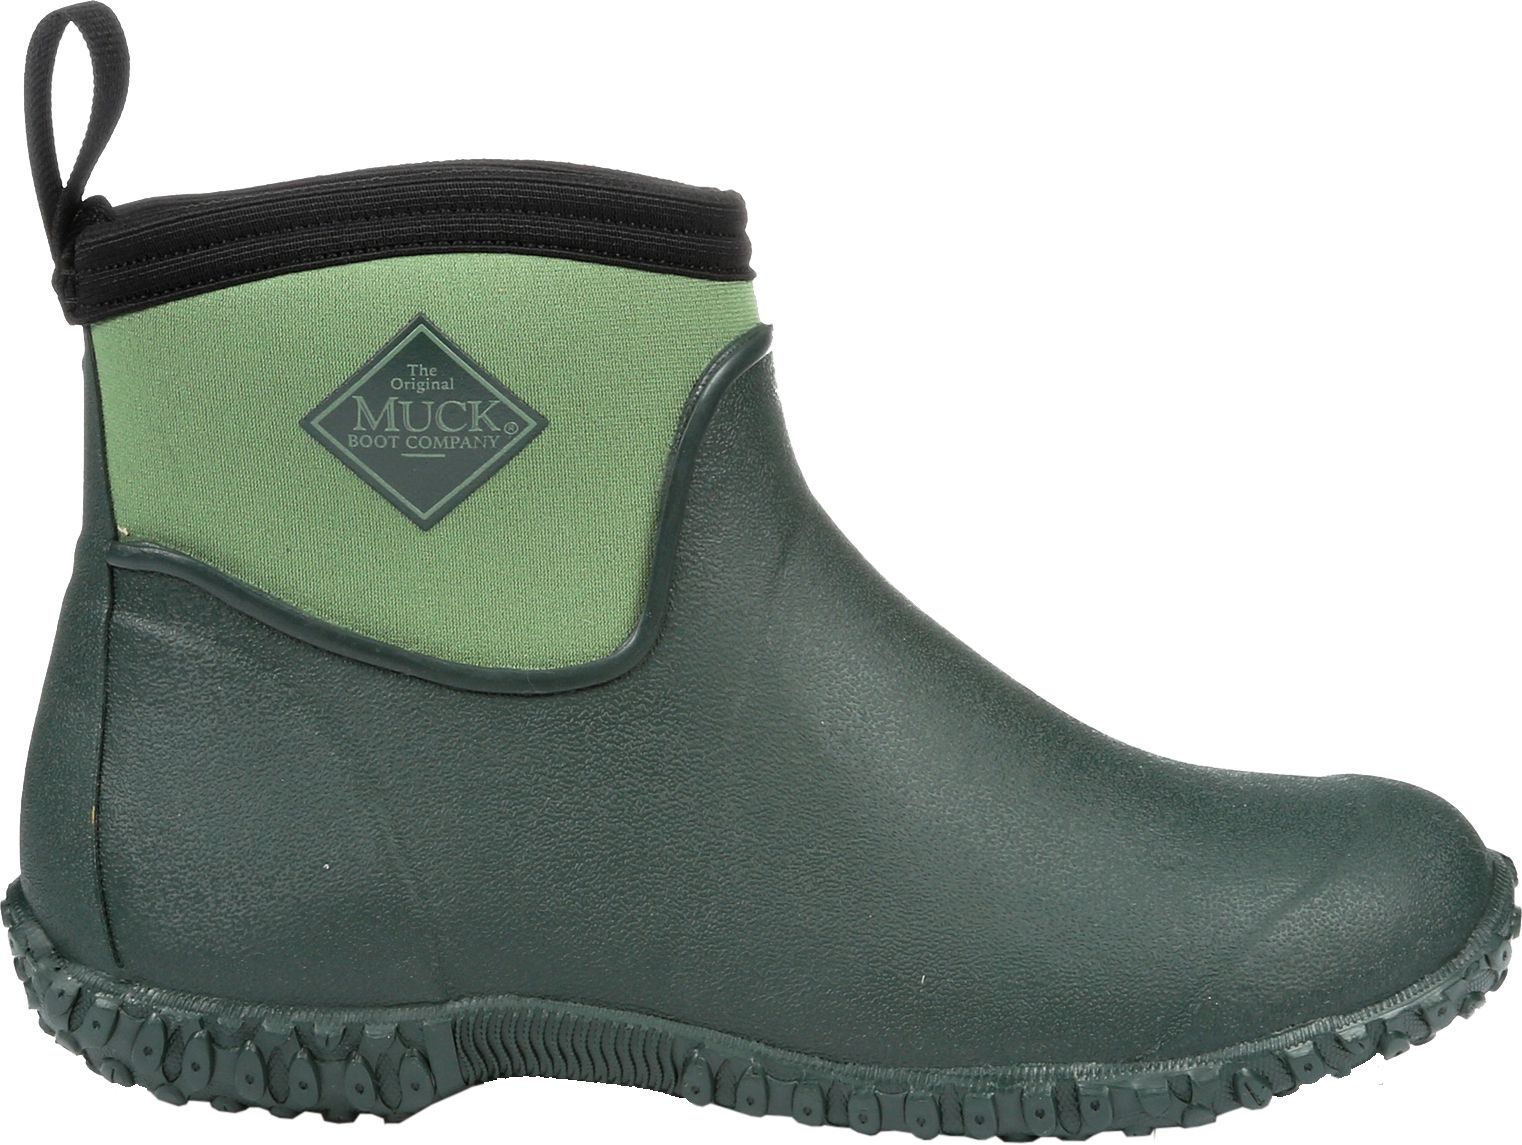 Muck Boots | DICK'S Sporting Goods